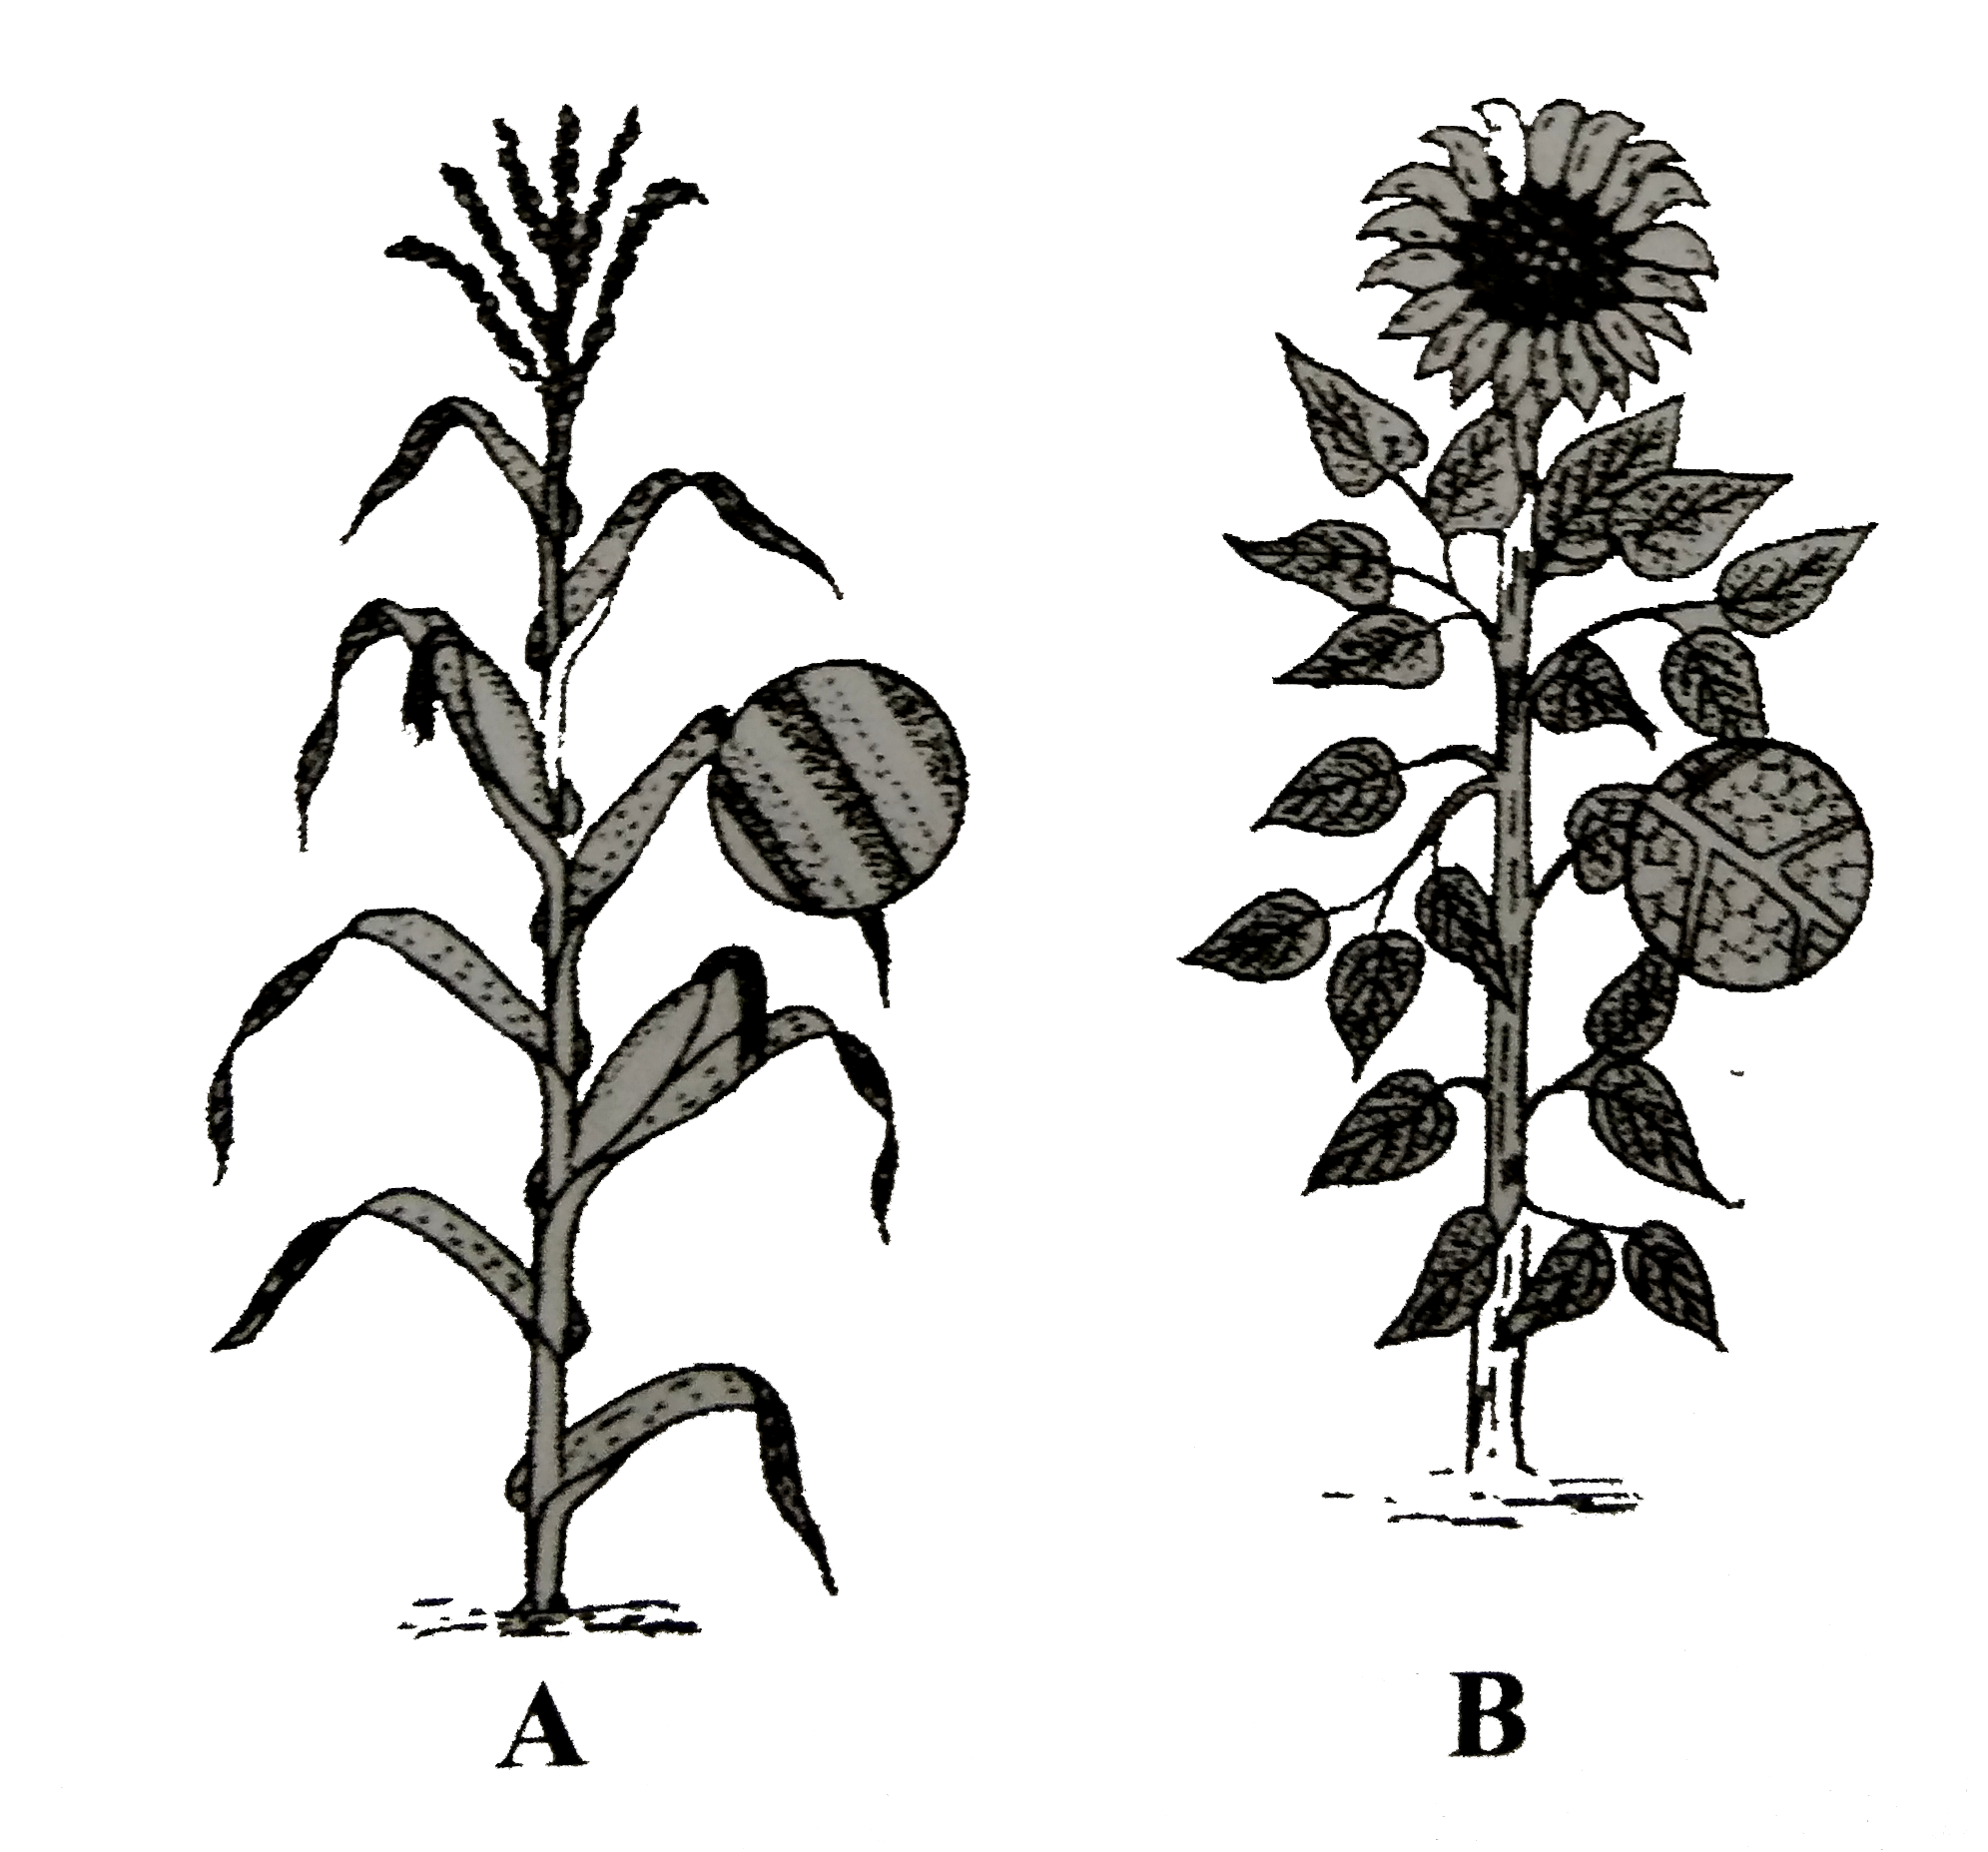 Angiosperms A and B shown in the figure belong the classand respectively.